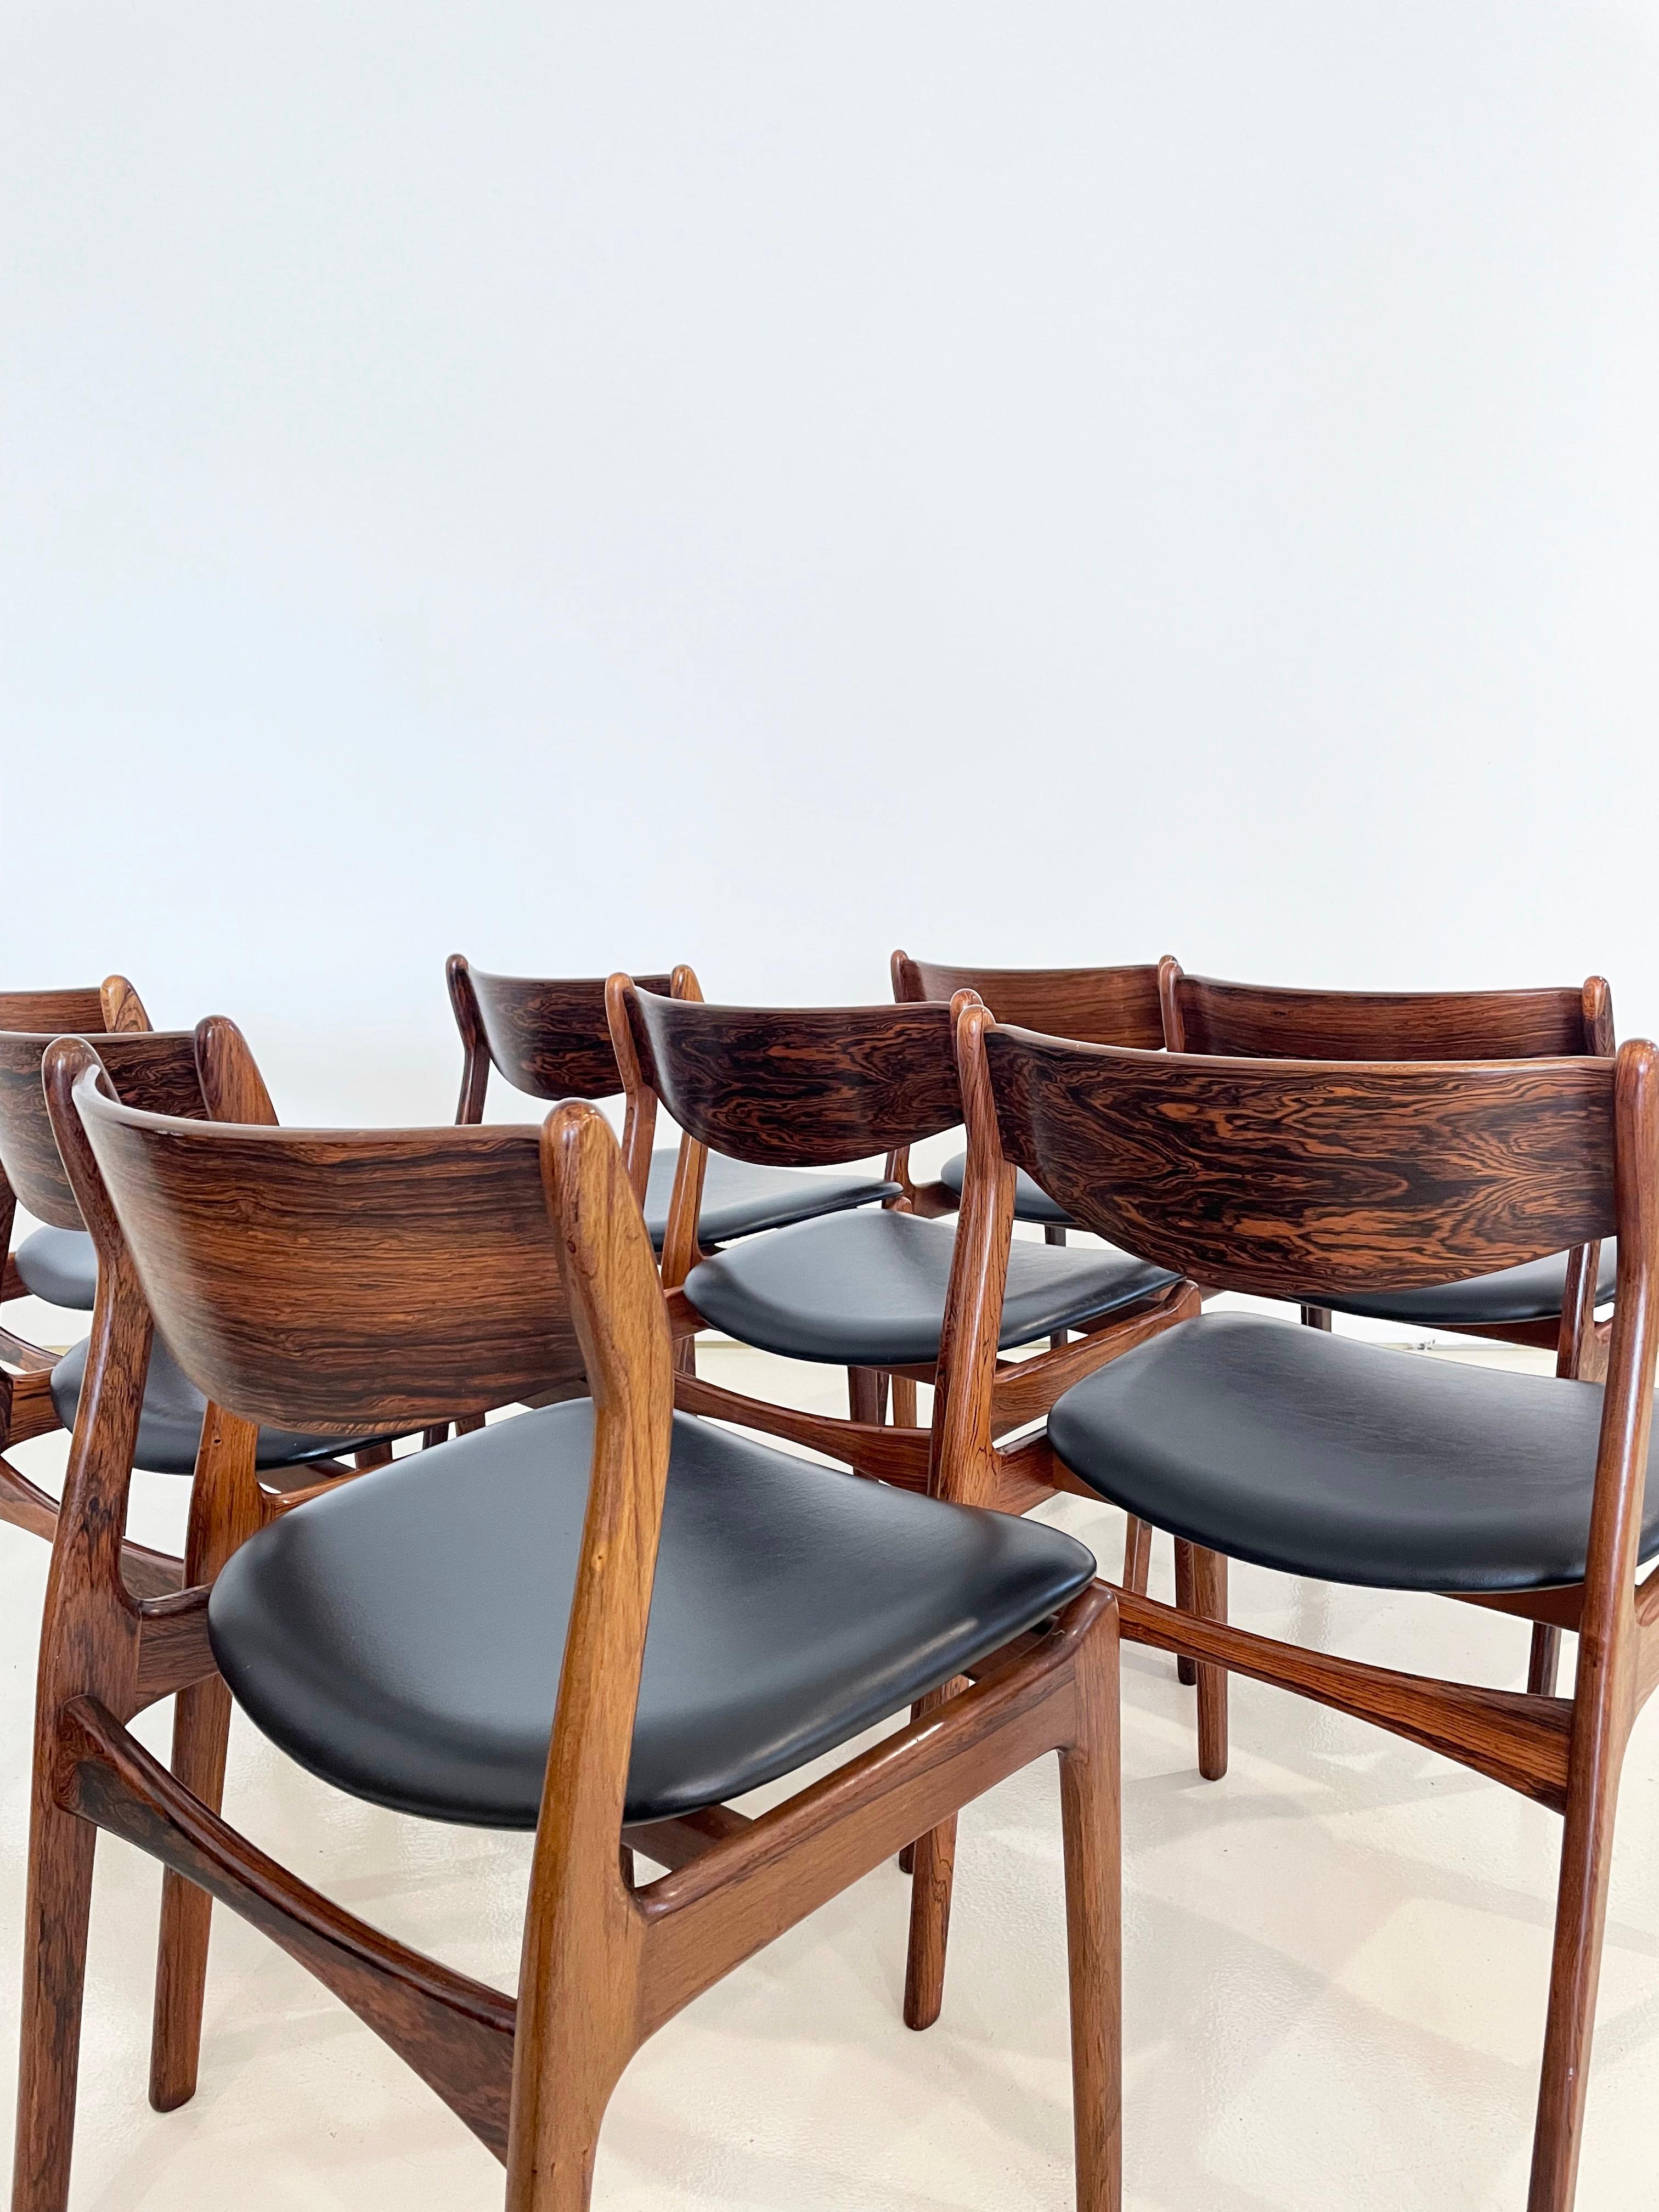 Upholstery Vintage Mid-century Danish Dining Chairs, Designed by P.E. Jorgensen, Set of 8 For Sale